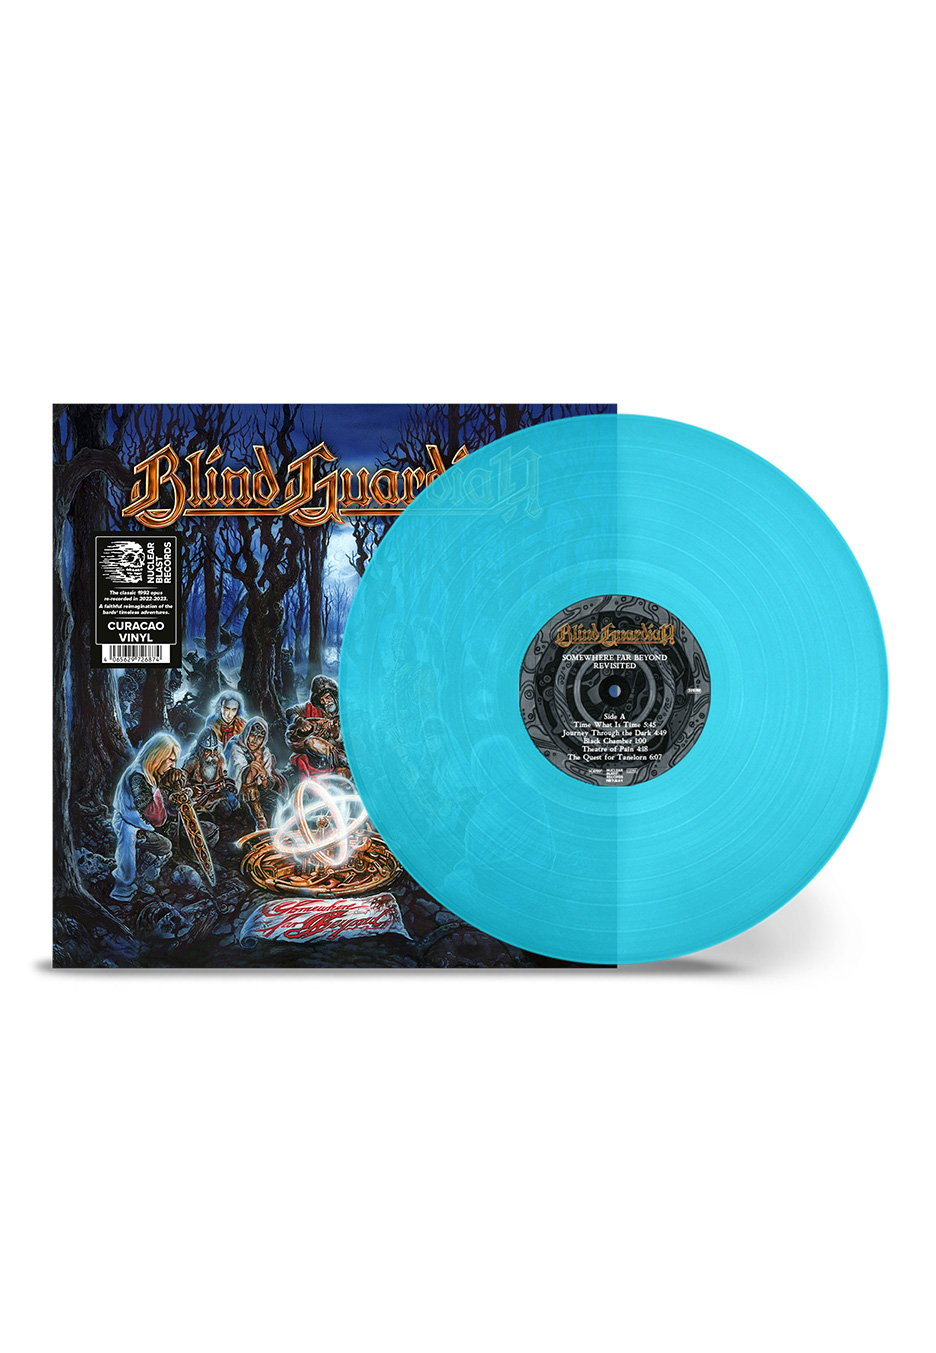 Blind Guardian - Somewhere Far Beyond Revisited Ltd. Curacao - Colored 2 Vinyl